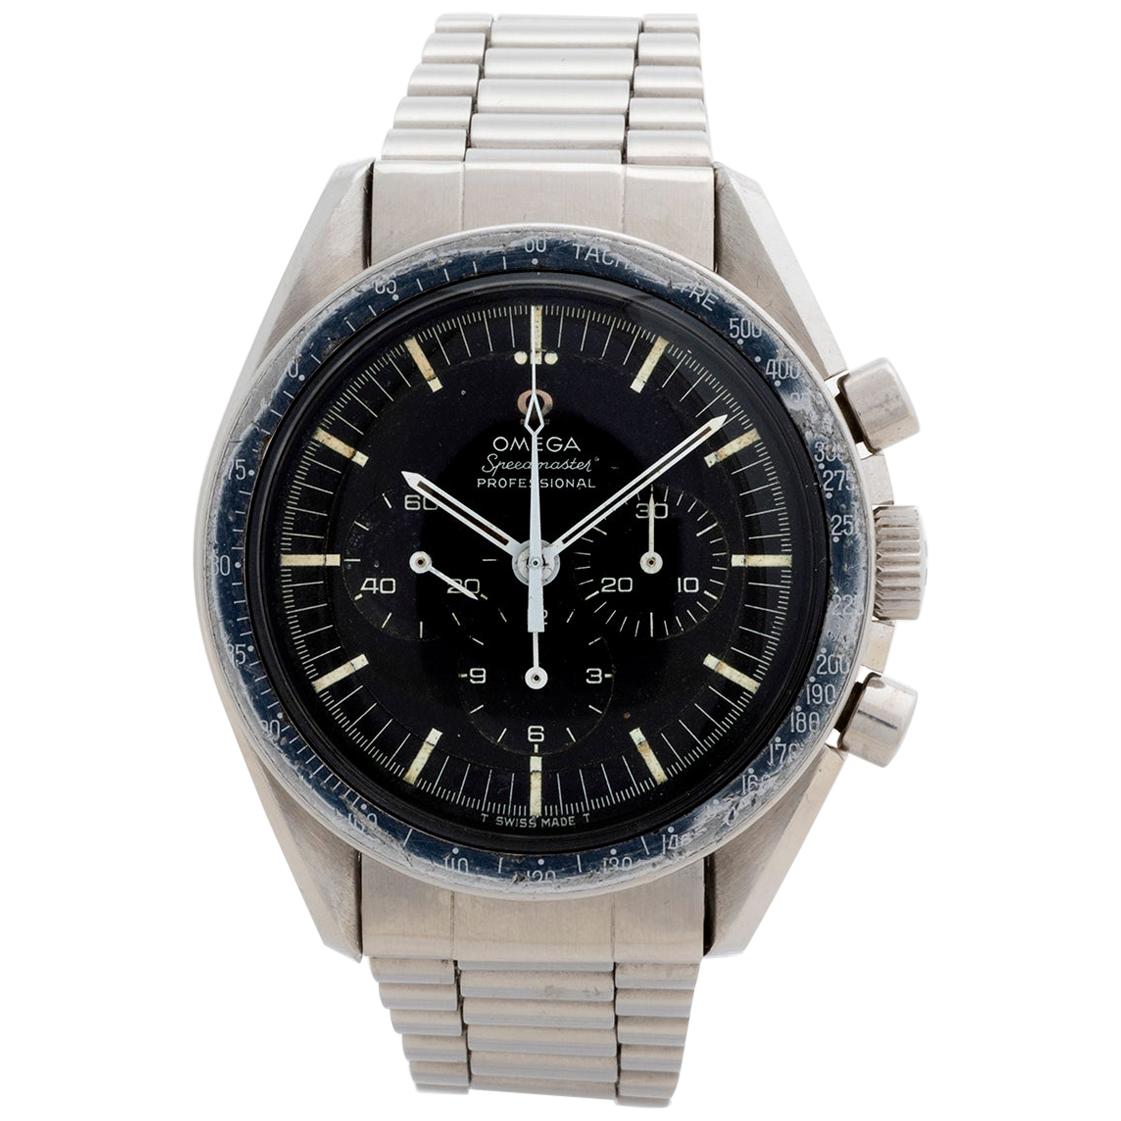 Vintage Omega Speedmaster ref ST145.012, with Archive Extract